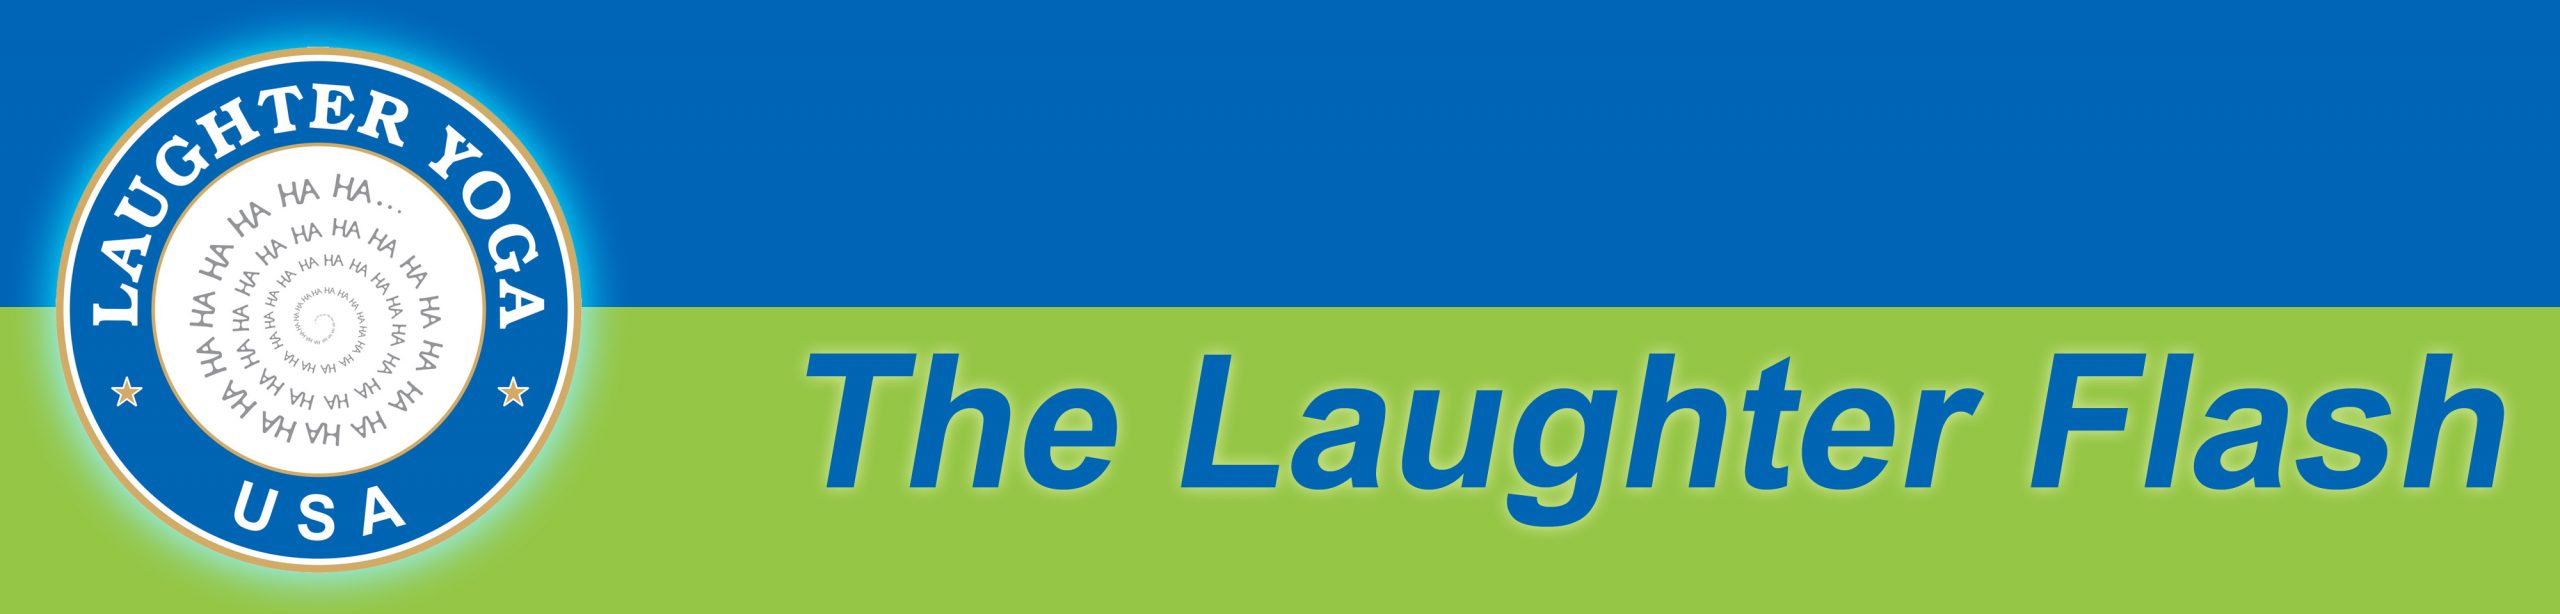 The Laughter Flash